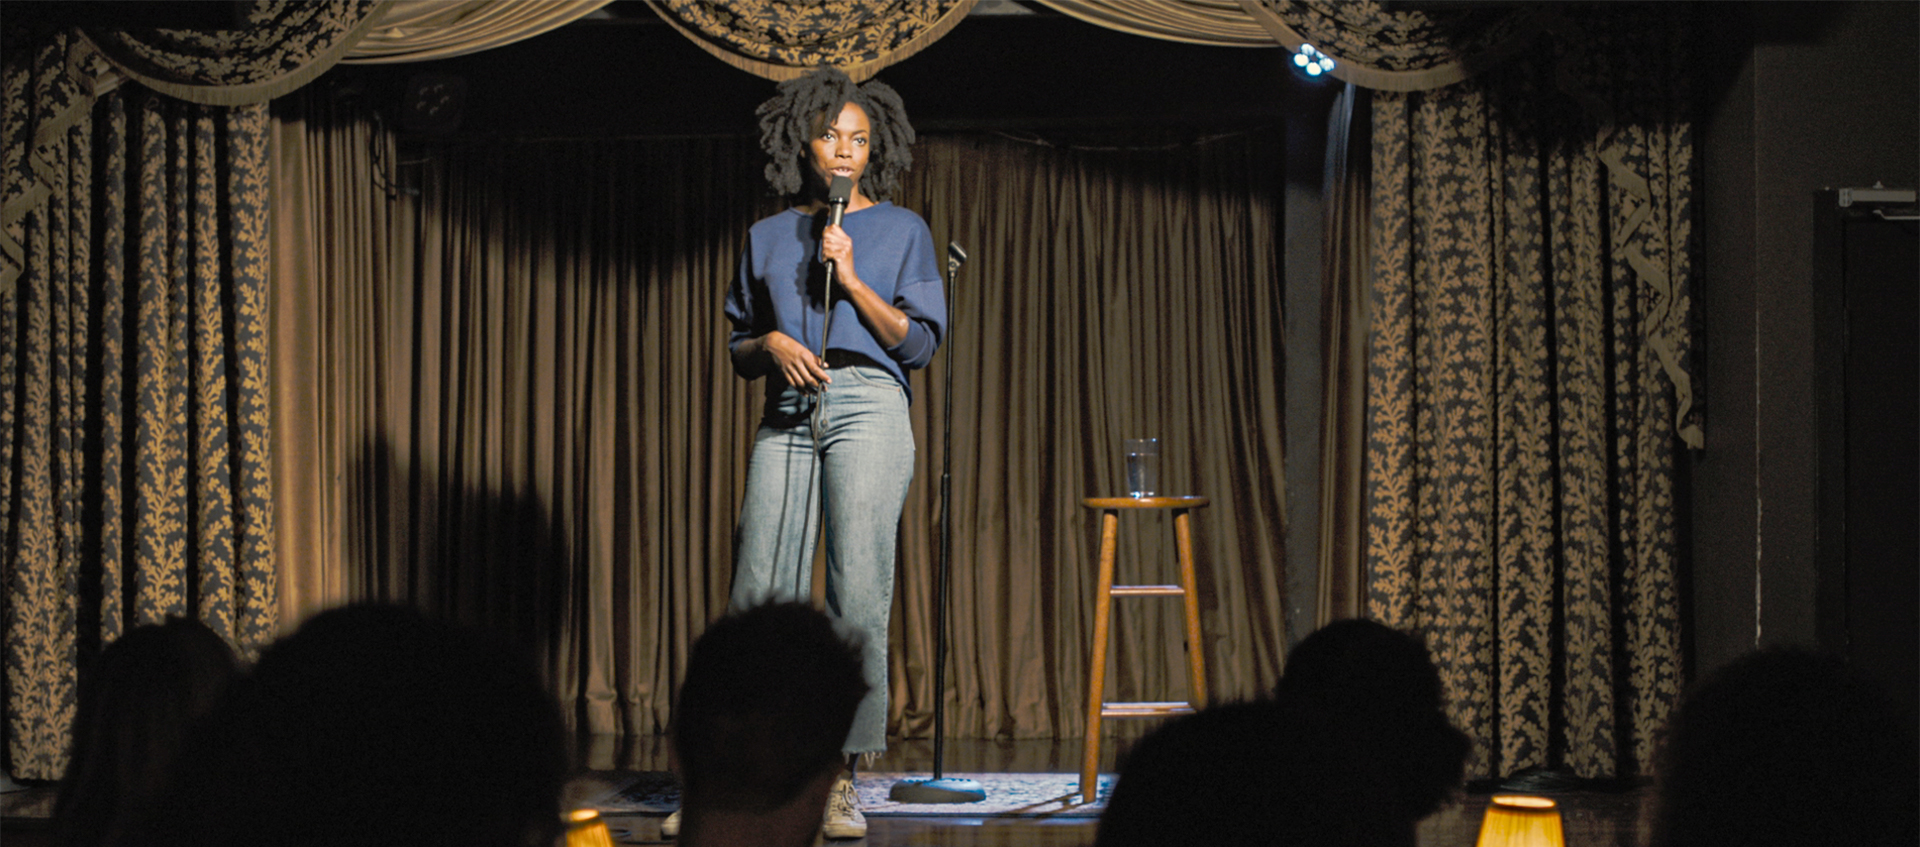 A woman on stage doing stand-up comedy. She stands in front of a stool and holds a microphone as she addresses the audiences. She wears a blue shirt and blue jeans